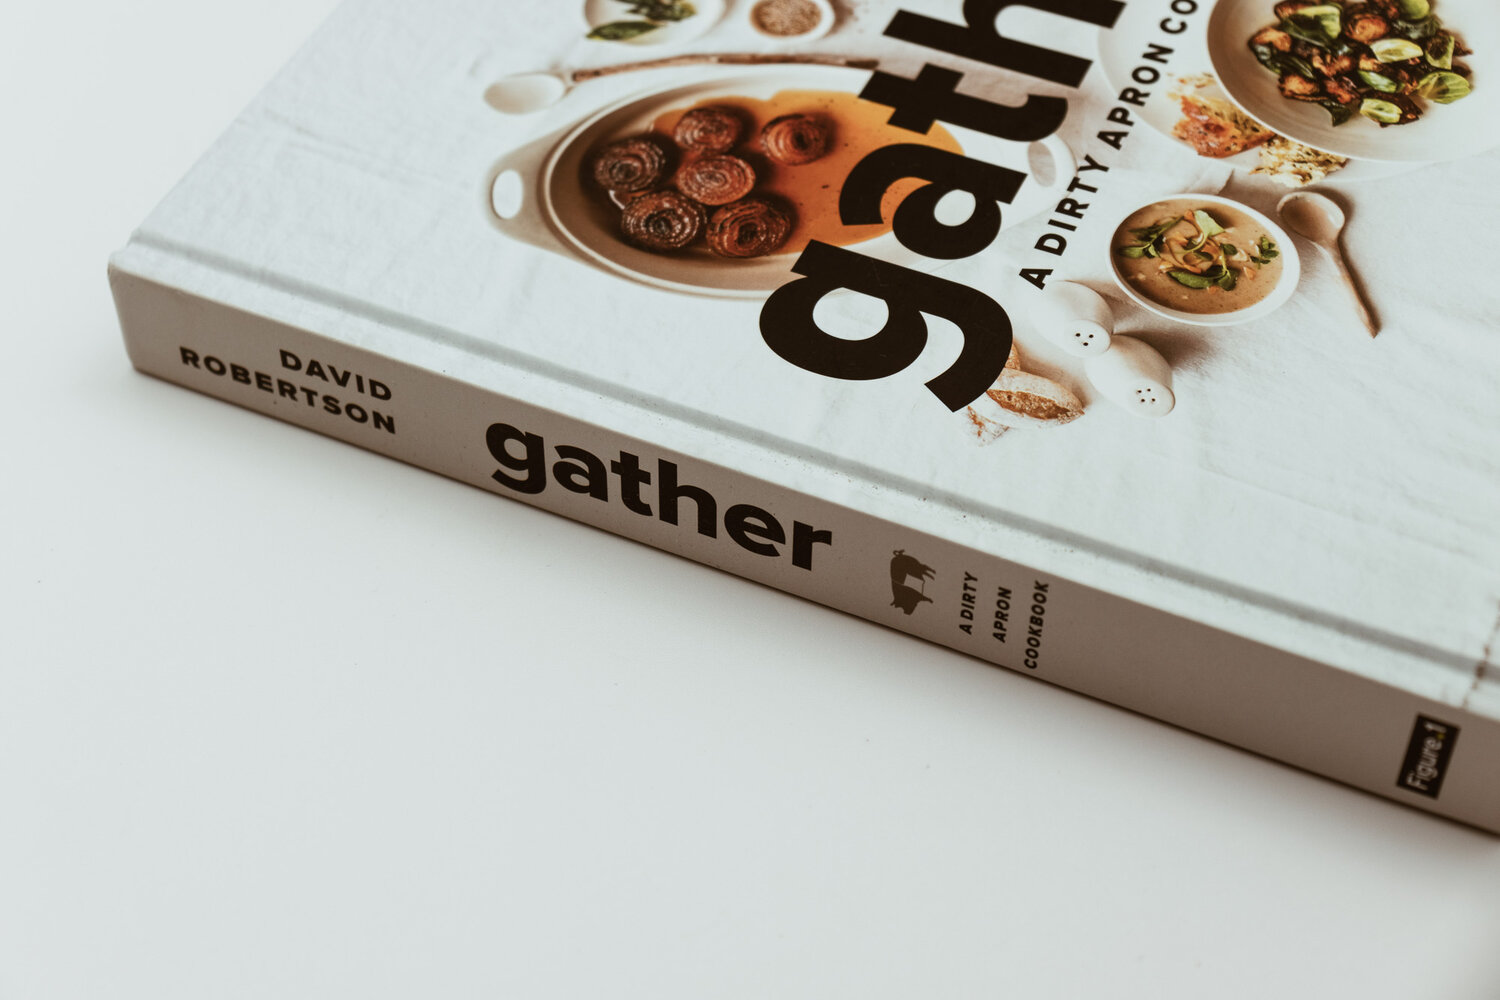 Gather A Dirty Apron Cookbook By David Robertson Bfearless